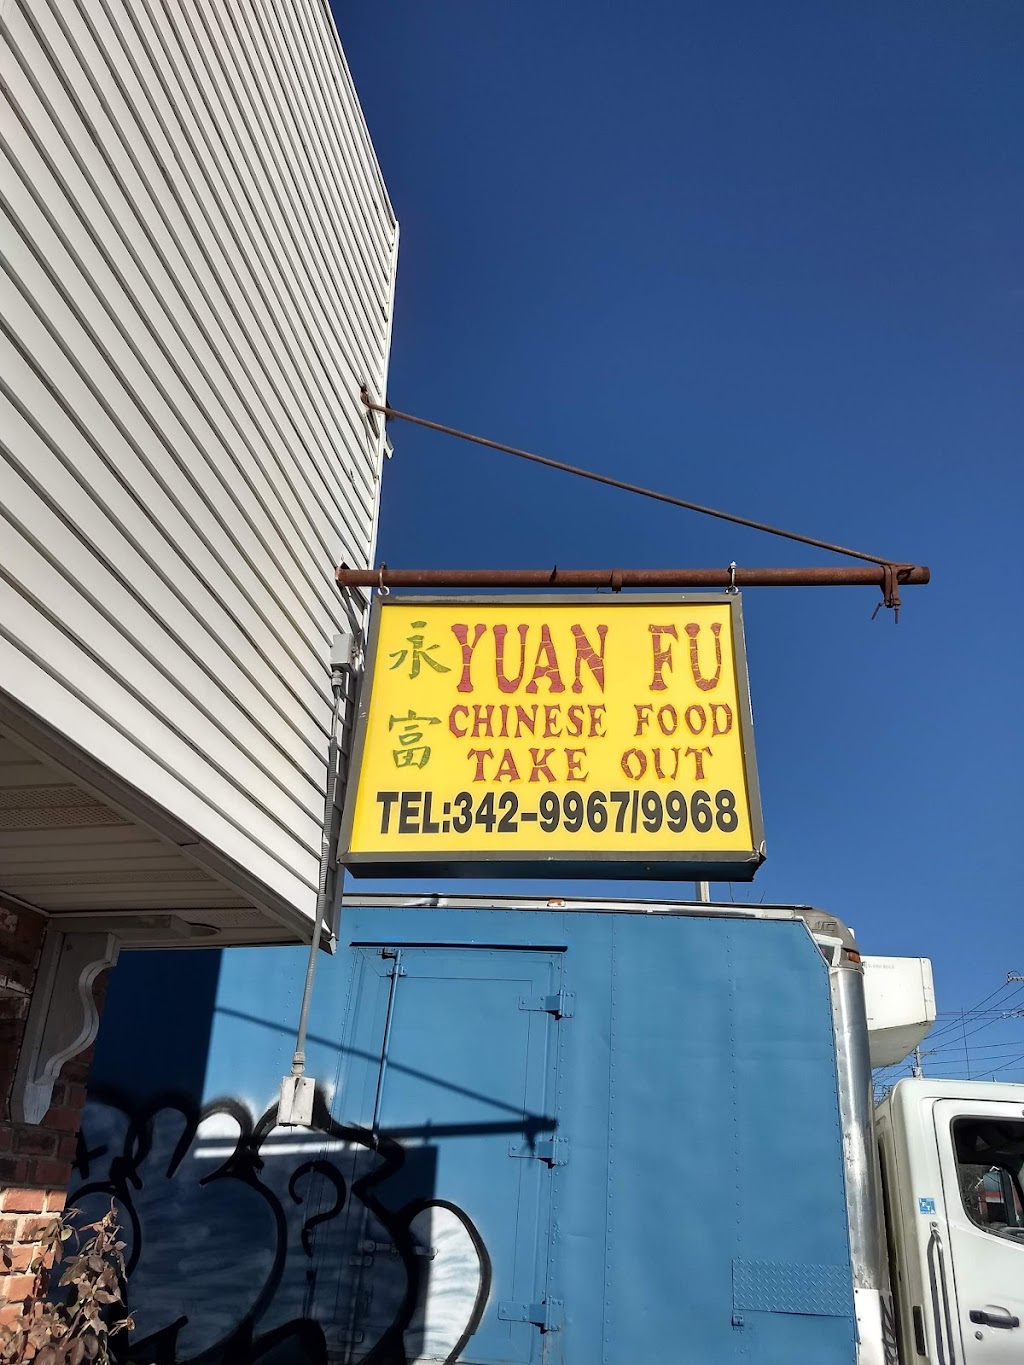 Yuan Fu | 251 Highland Ave Ext, Middletown, NY 10940 | Phone: (845) 342-9967